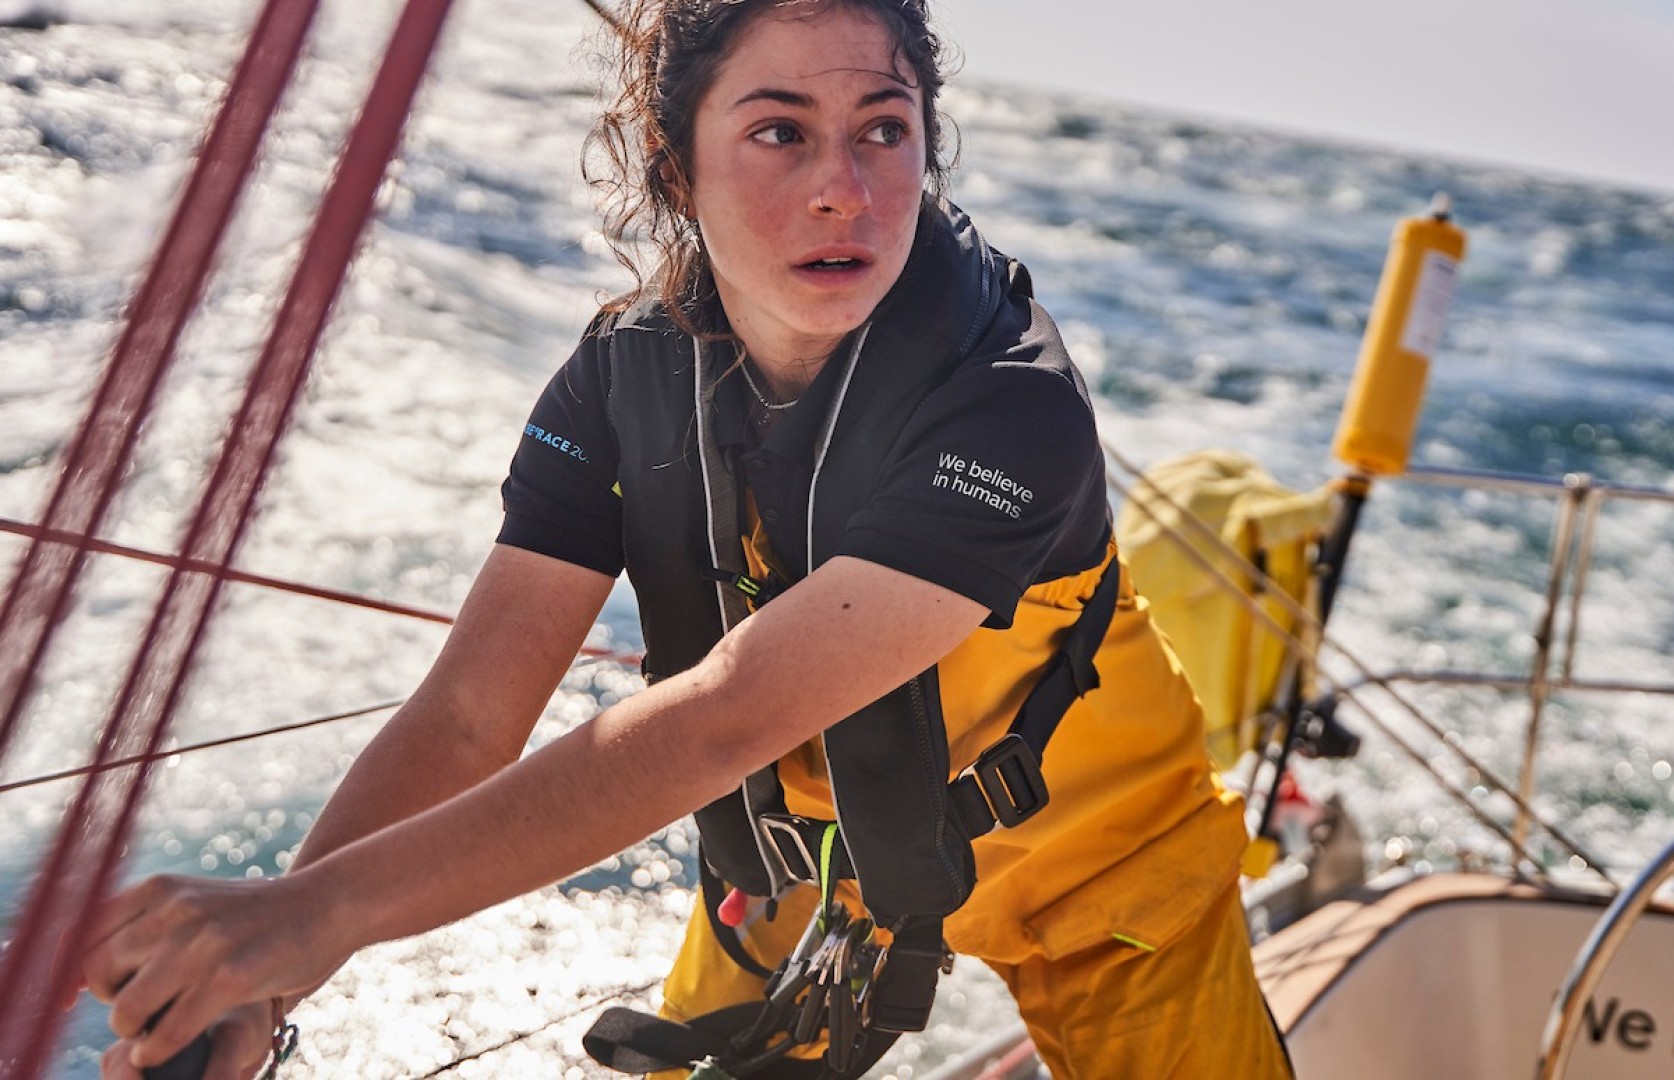 18-year-old Italian Sophie is ready for the challenge onboard Translated 9 IT (09). She started sailing at 9, achieving outstanding results in European championships on an Optimist boat coming first place in 2018. Credit: StudioBorlenghi | Luca Butto | OGR 2023 Translated 9